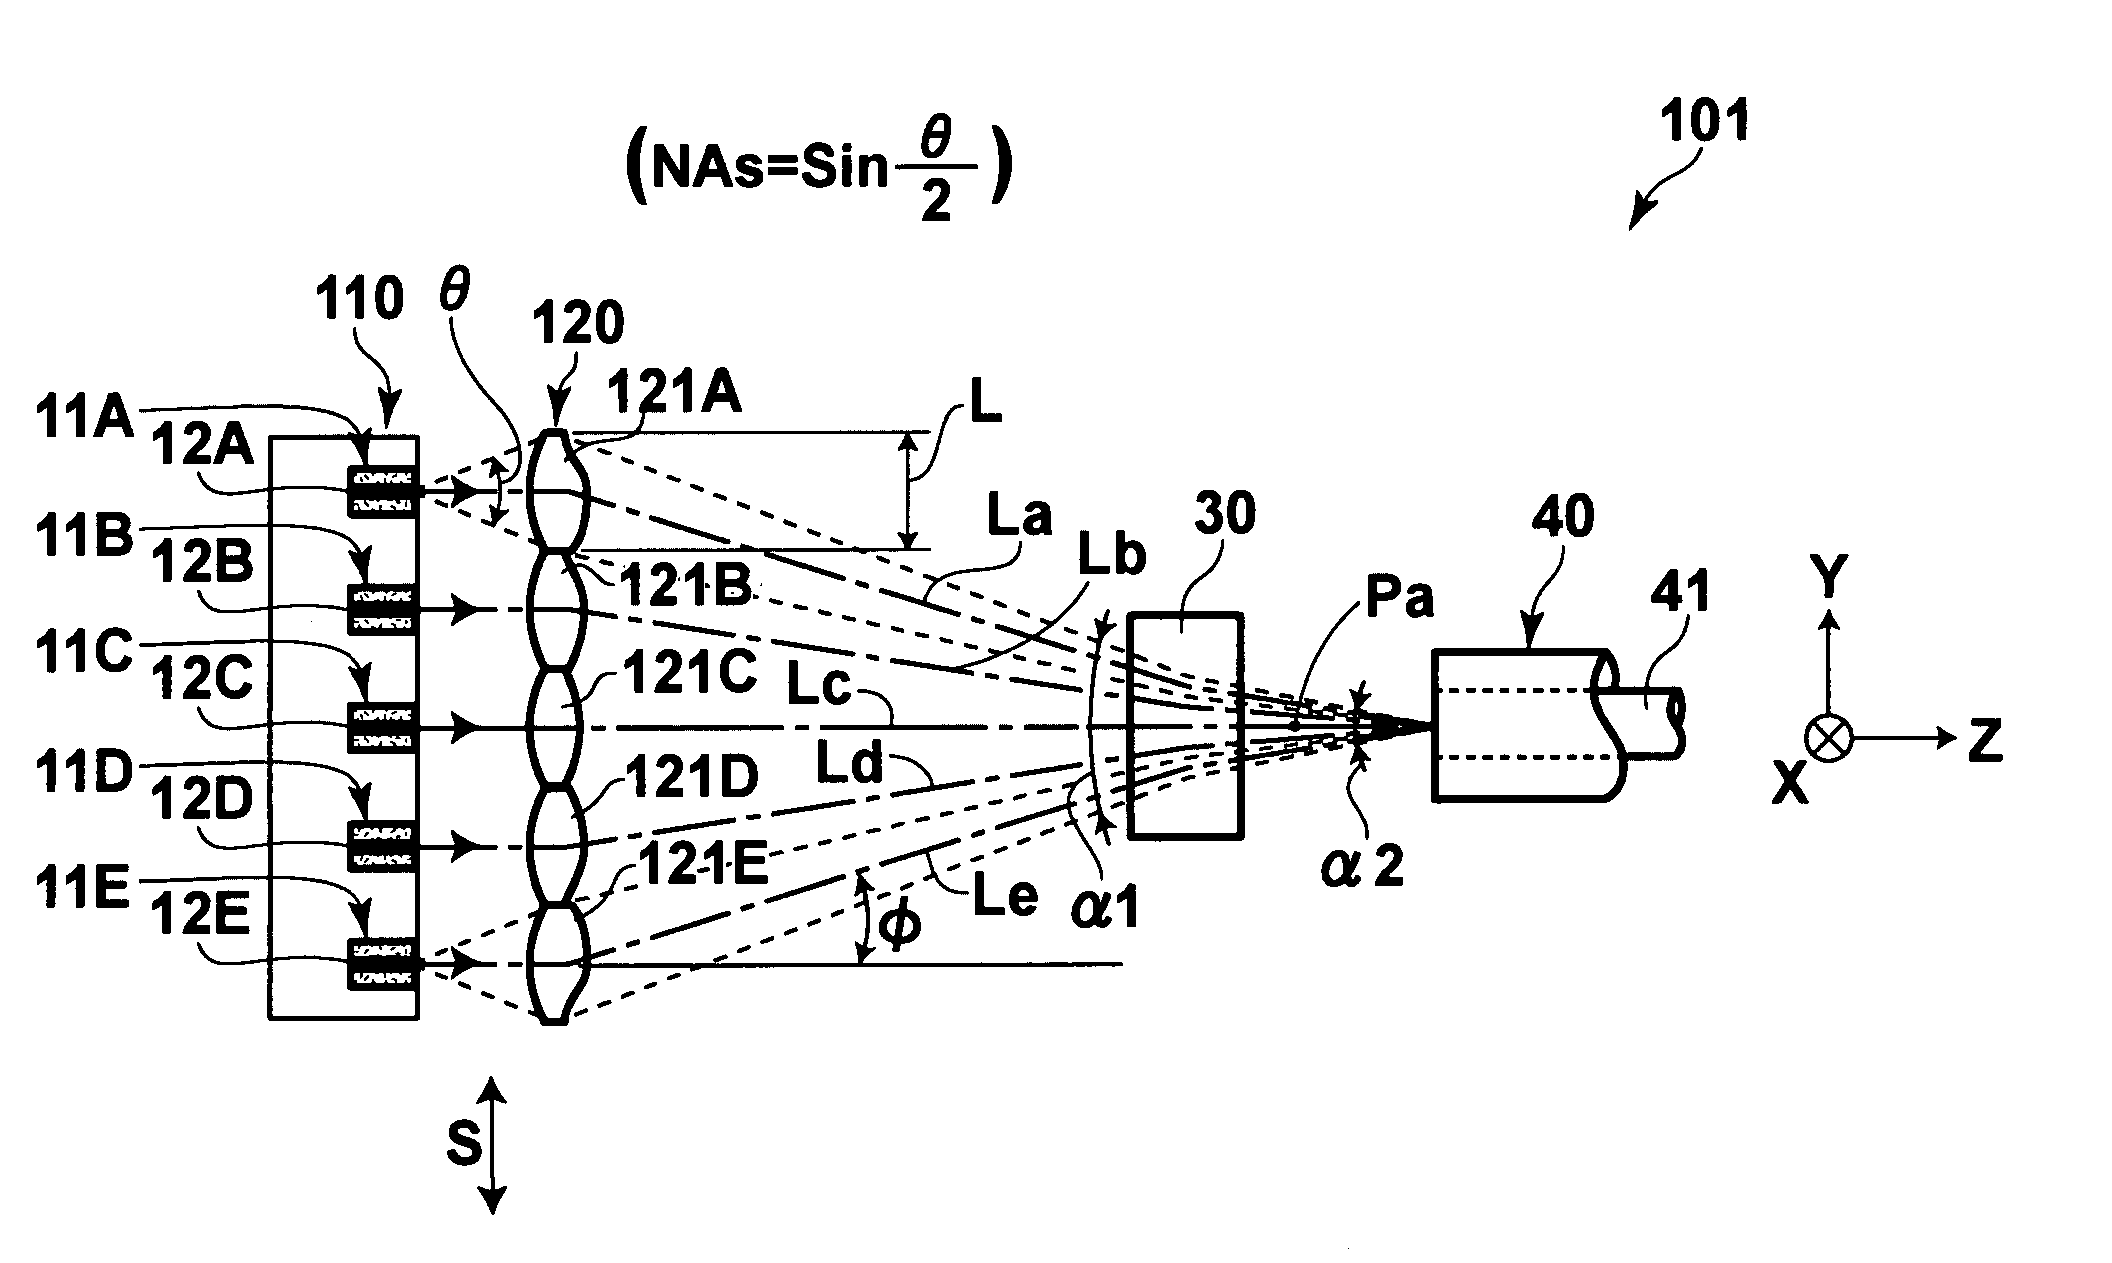 Apparatus for synthesizing laser beams